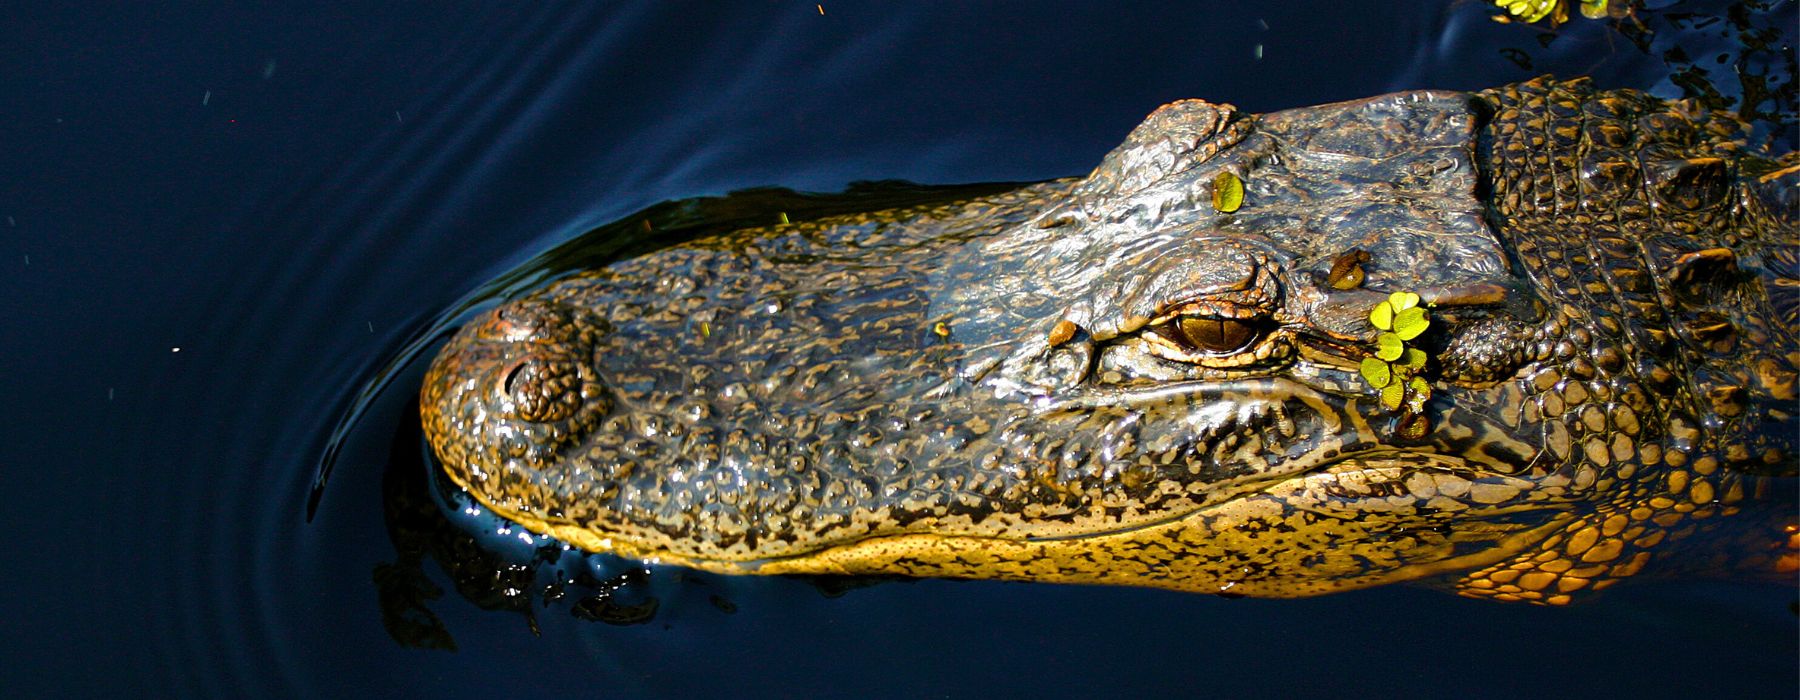 AMAZON CAIMAN: EVERYTHING YOU NEED TO KNOW